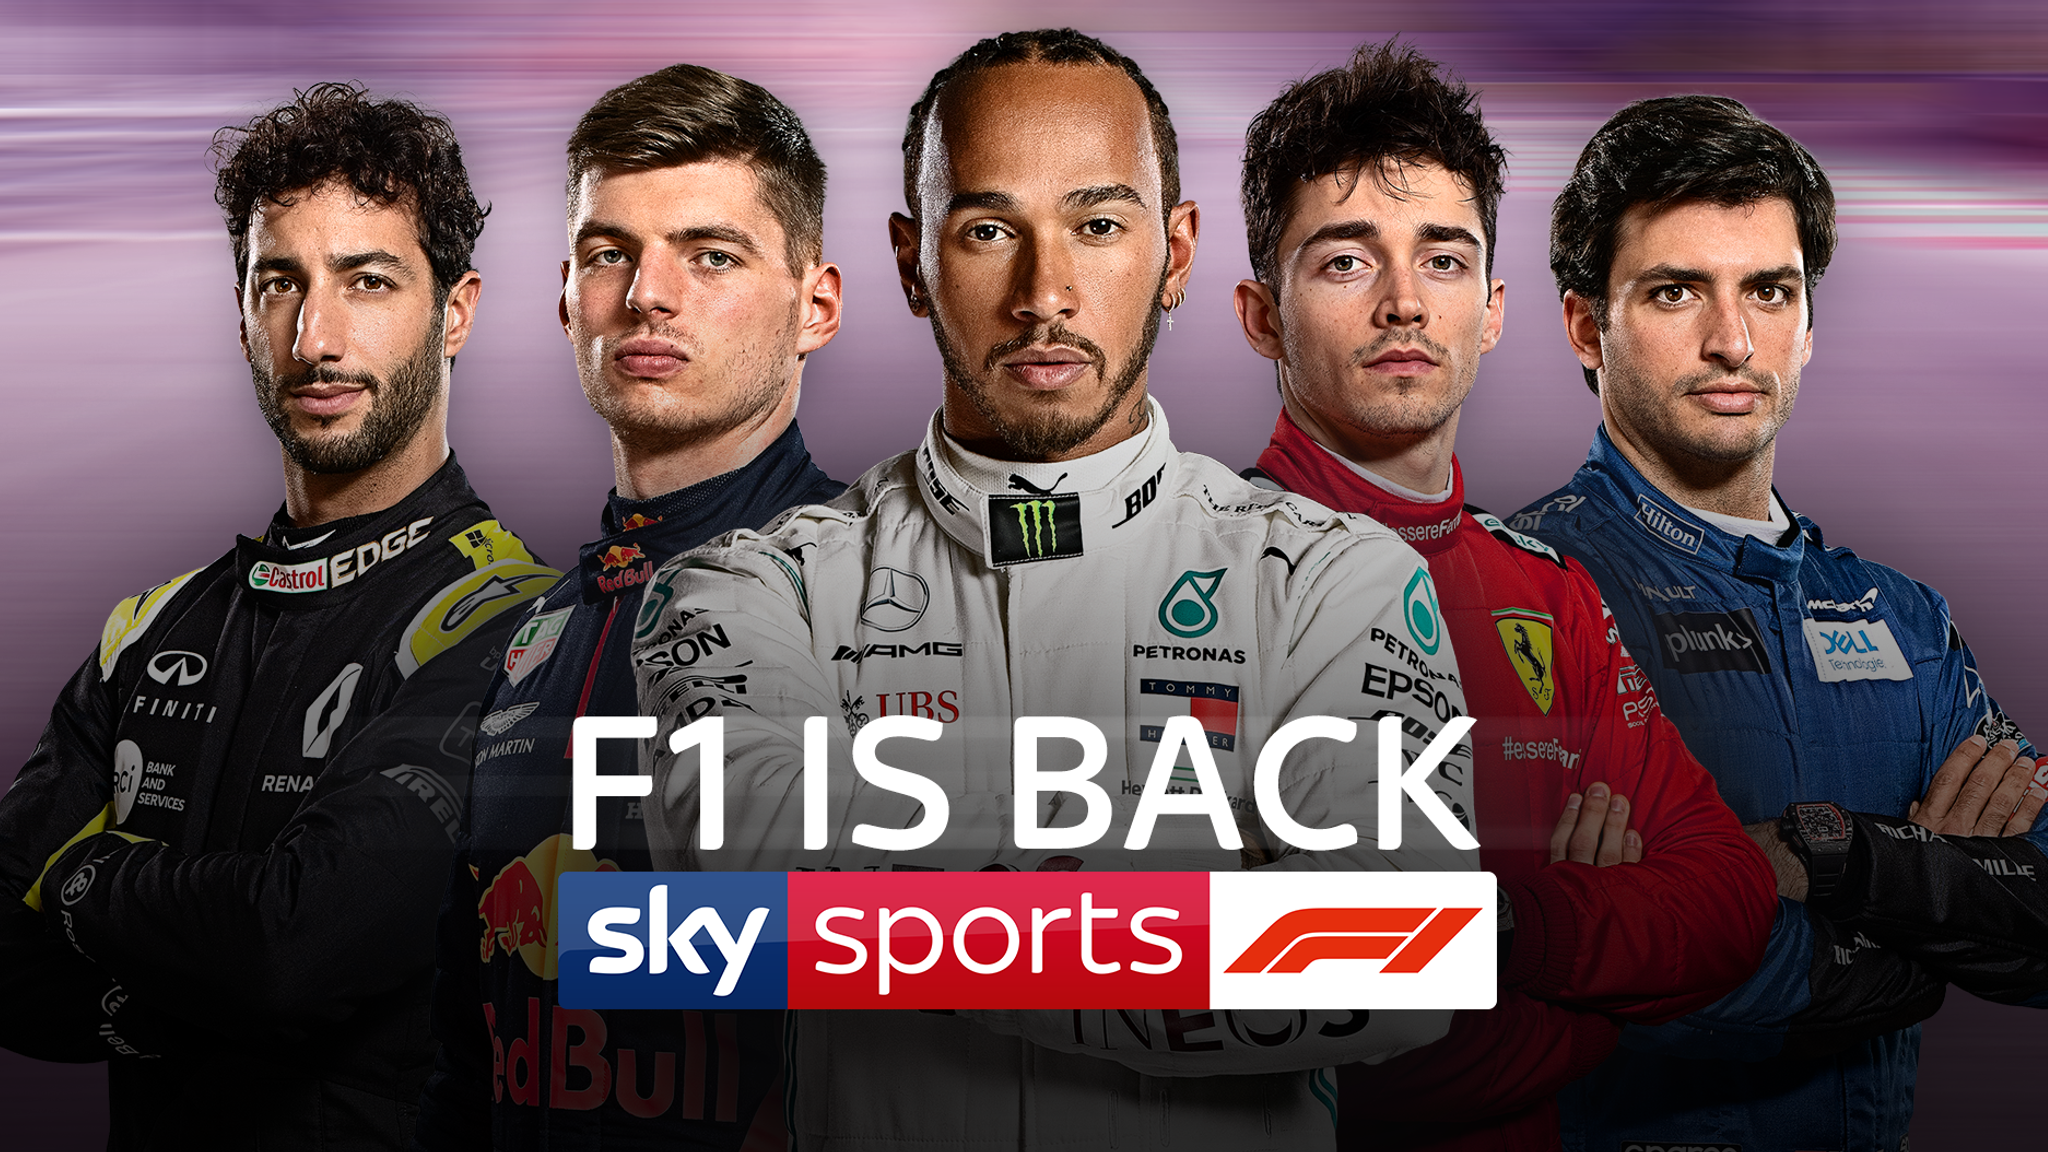 F1 is back Live coverage of every race of 2020 season on Sky Sports F1 News